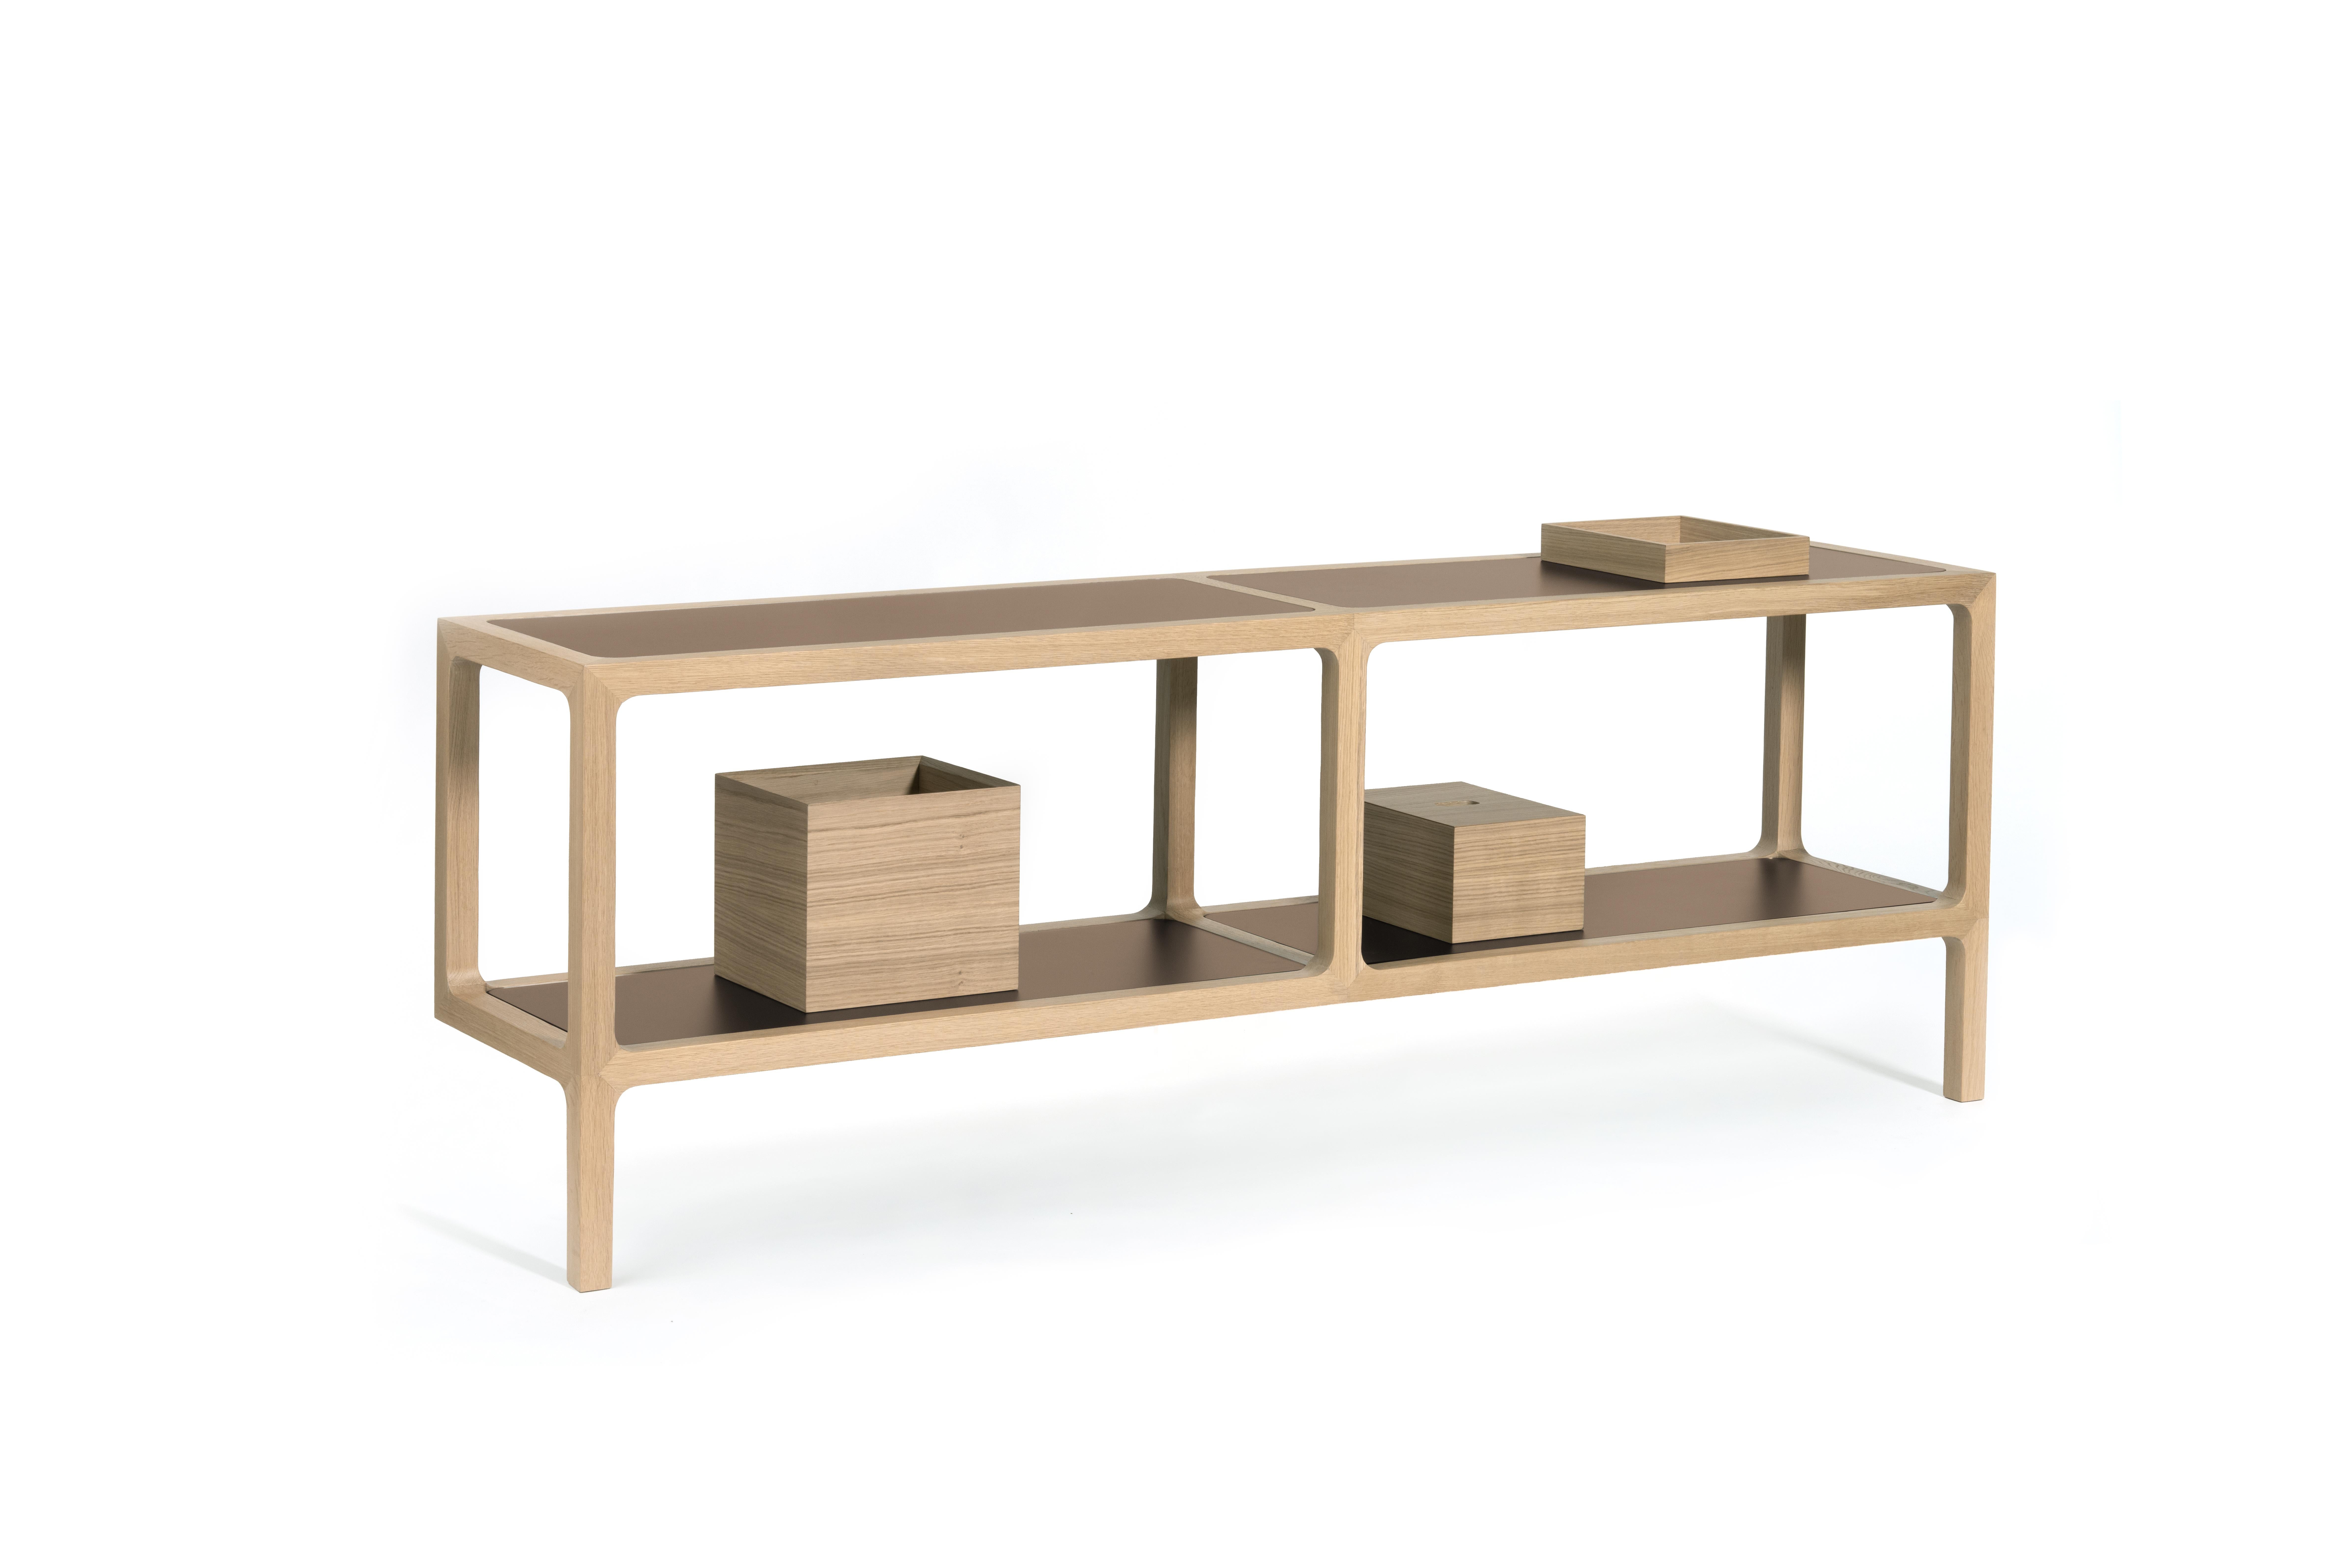 Pair of more box 15 by Mentemano
Dimensions: W20 x D 28 x H 15 cm
Materials: Oak


A tray and two boxes available in two dimensions with cover, made of wood with bronze mirror inserts as possible option.


Mentemano is a design concept brand